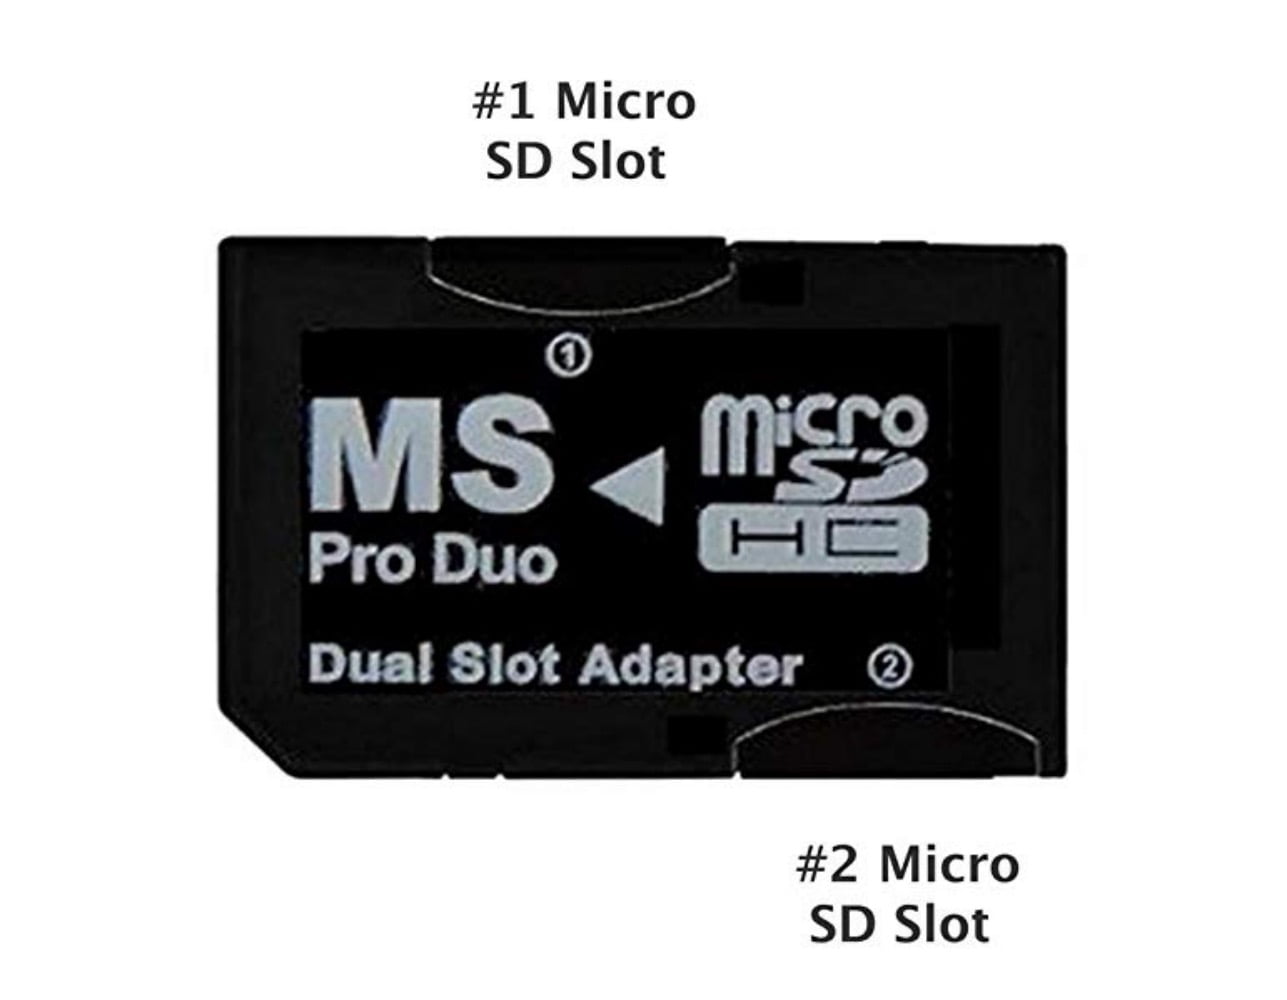 Memory Stick Pro Duo Mini MicroSD TF to MS Adapter SD SDHC Card Reader  1H2 10X 